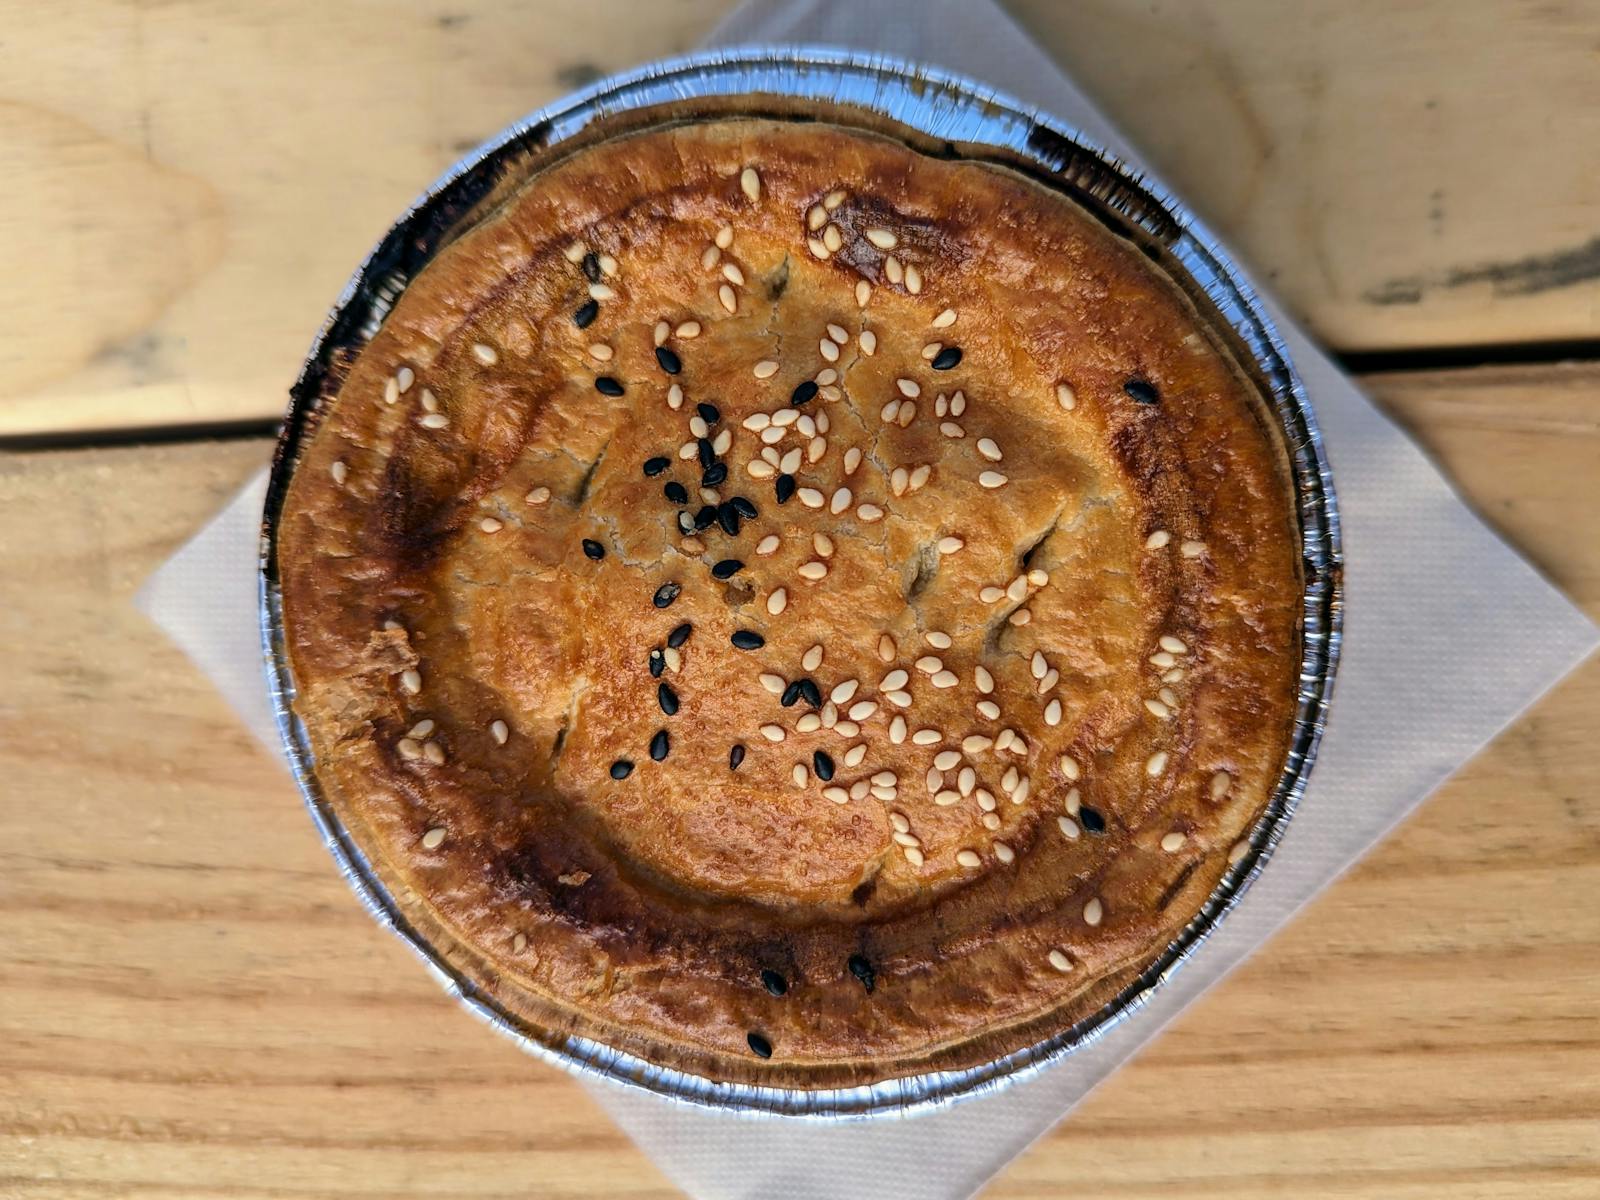 A hand-sized meat pie